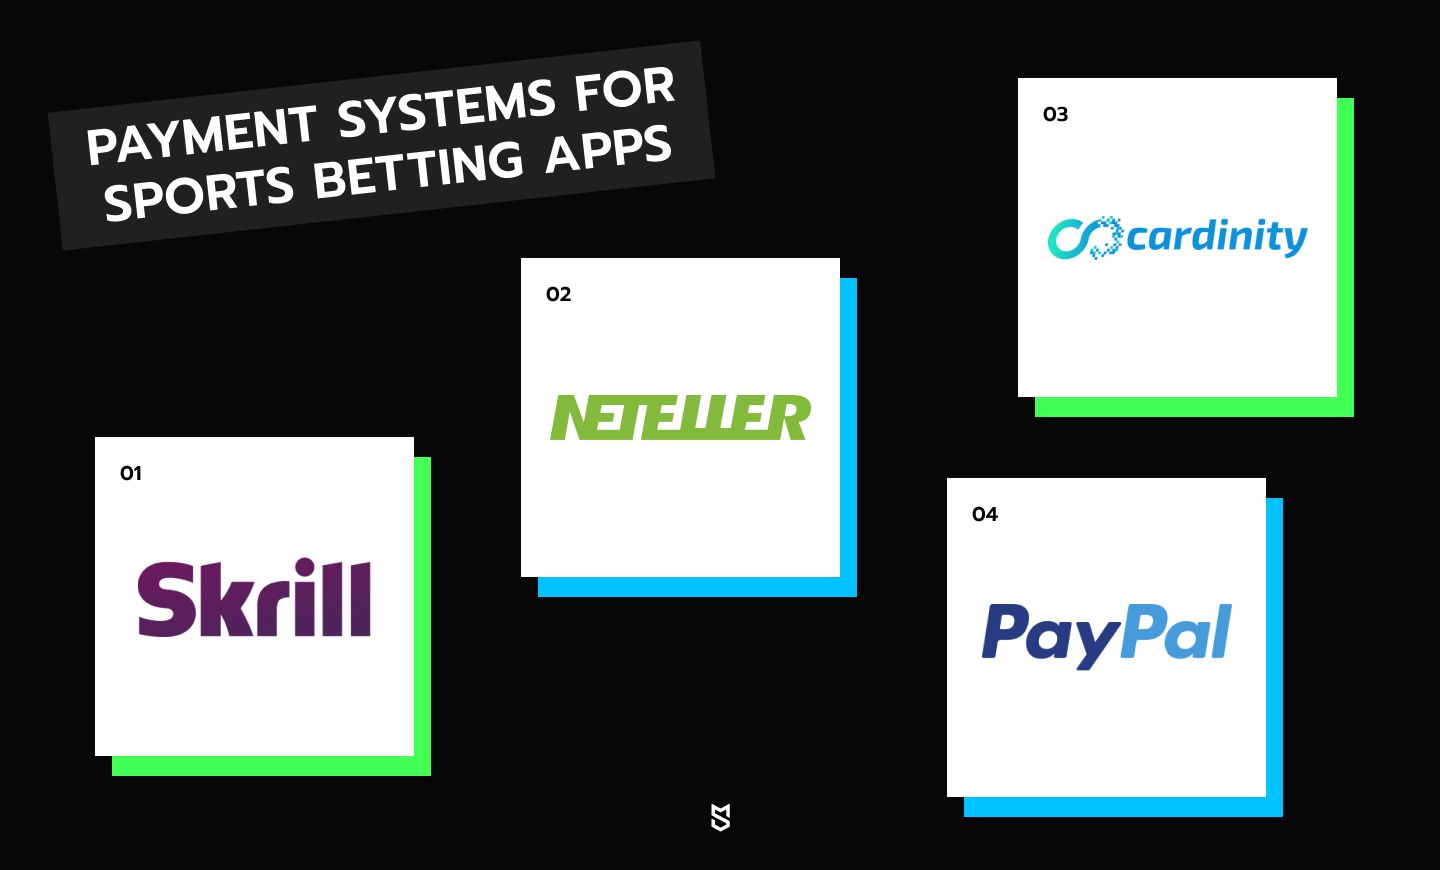 Payment systems for sports betting apps